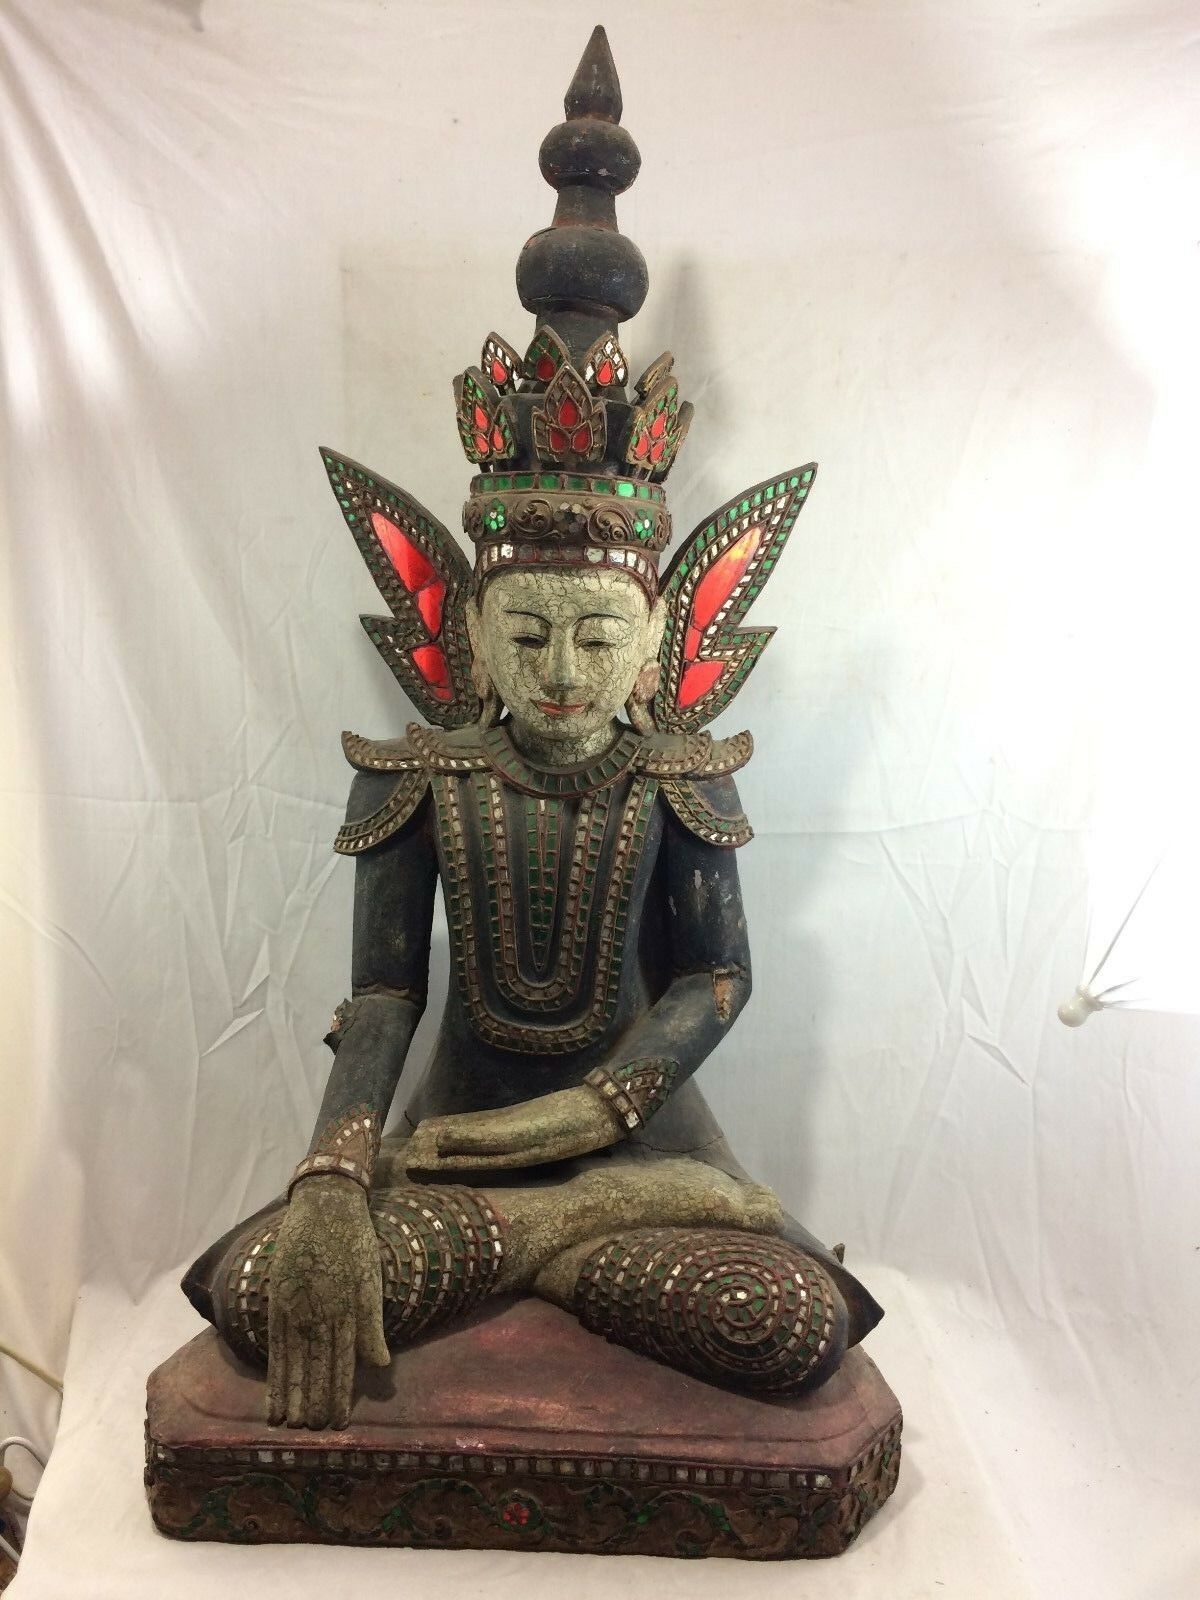 Large 19thc Burmese Seated Crowned Buddha Polychrome Paint W/ Mirror Accents 38"